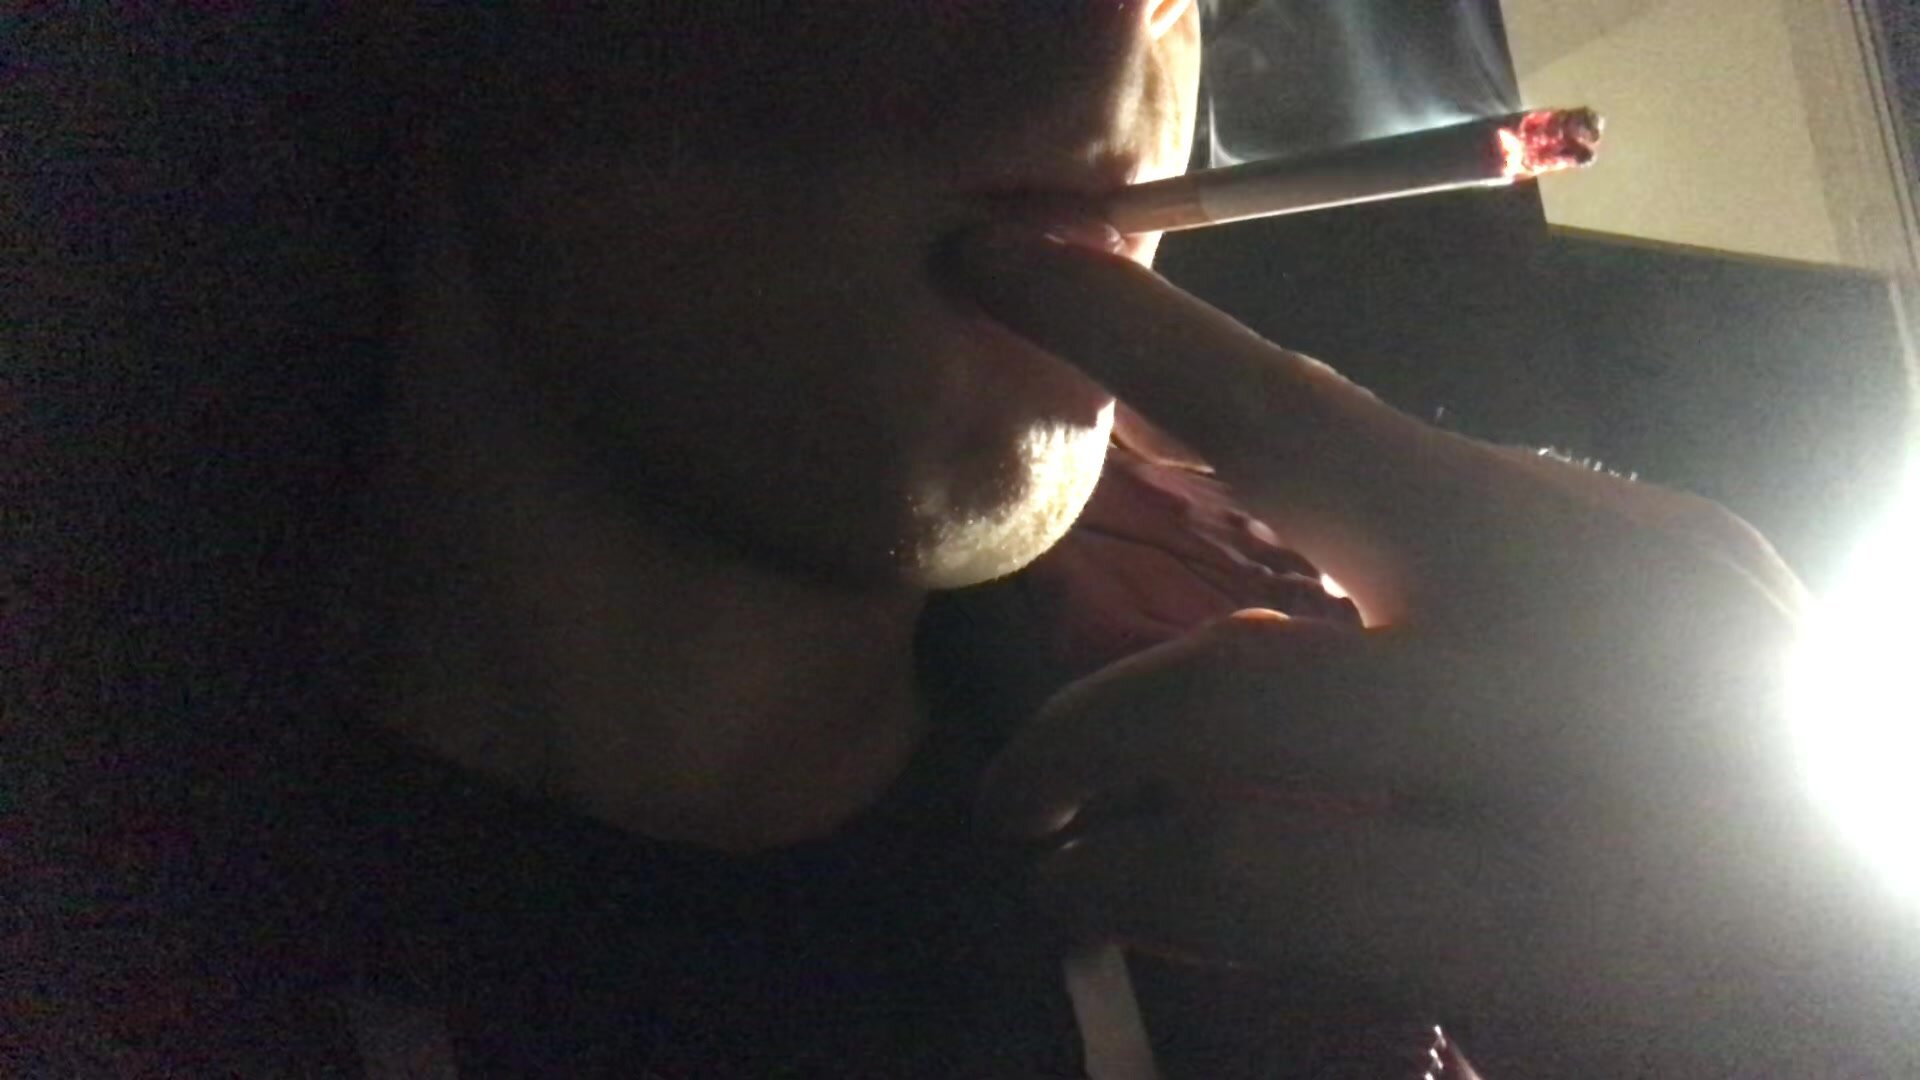 Marlboro Red Smoking in the Middle of the Night